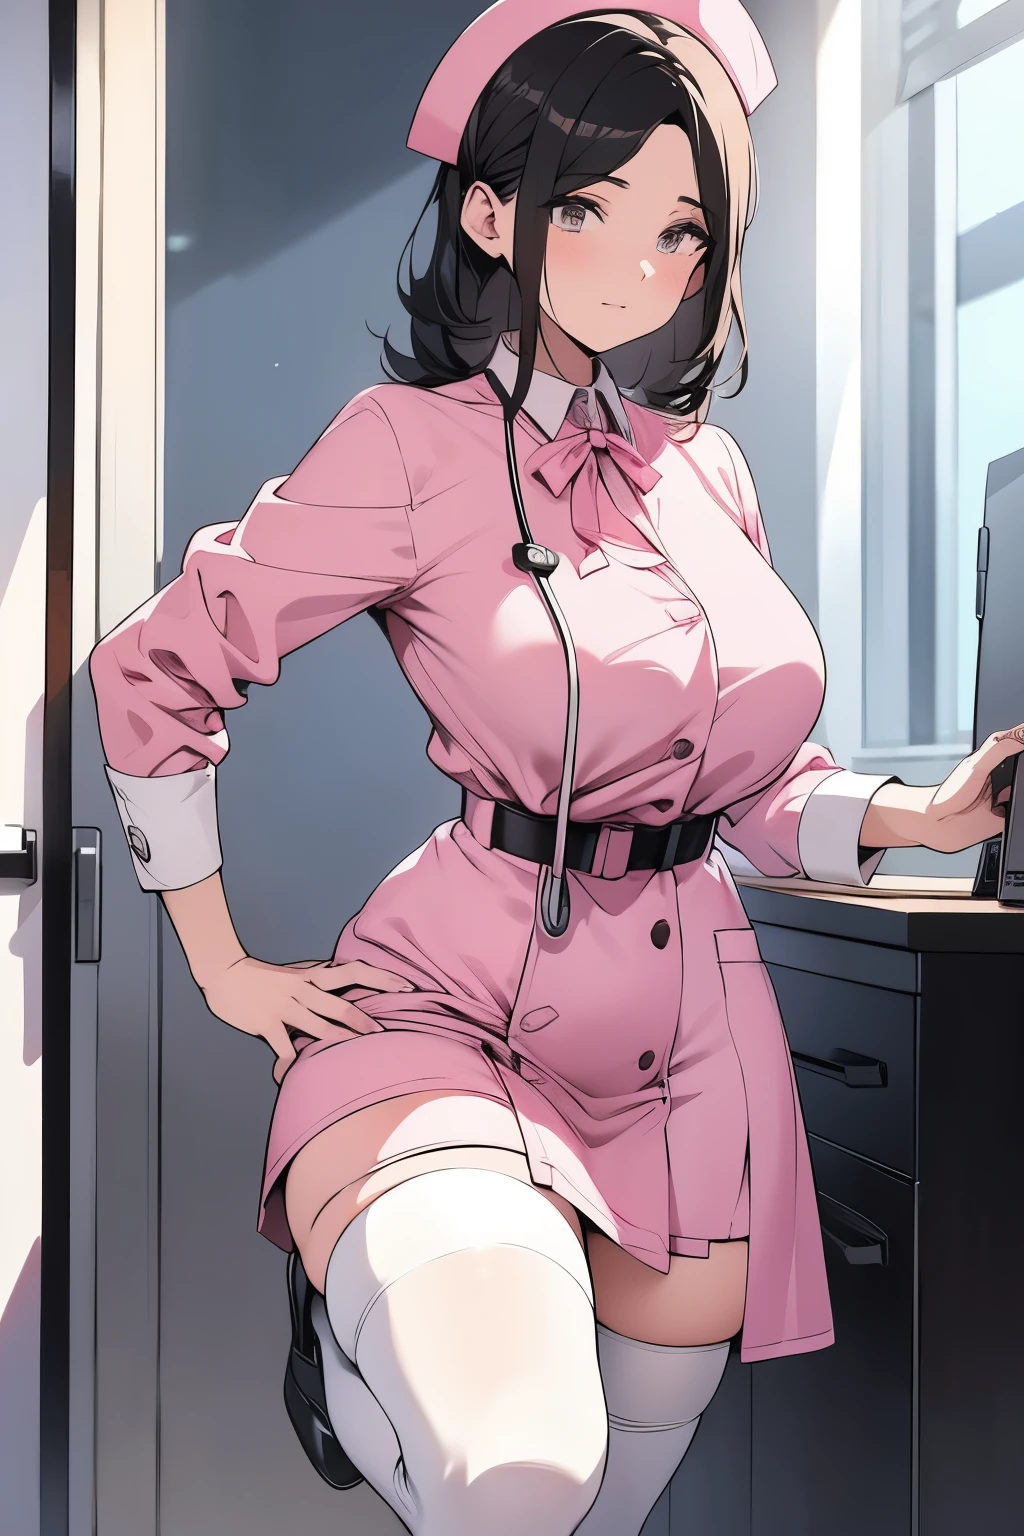 Mature nurse, looking at the viewer, white stockings, pink nurse uniform, stethoscope around her neck, holding examination file, examination room, standing on one leg